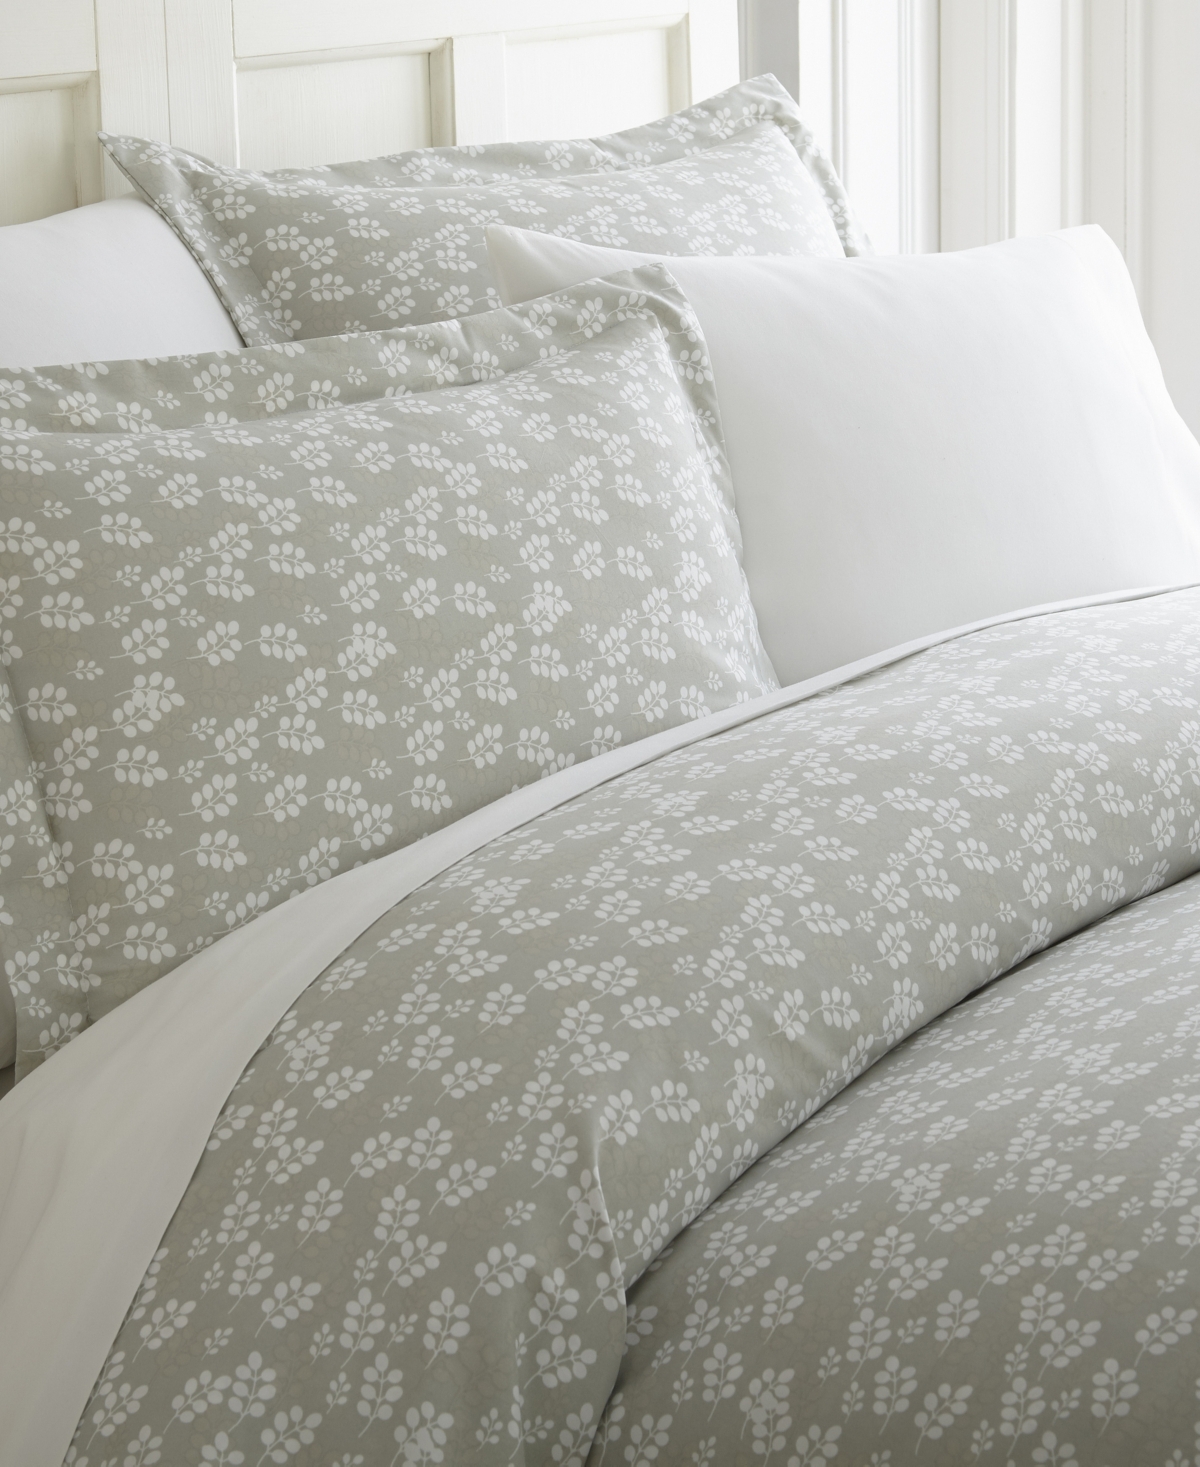 Ienjoy Home Elegant Designs Patterned Duvet Cover Set By The Home Collection, King/cal King In Grey Wheatfield